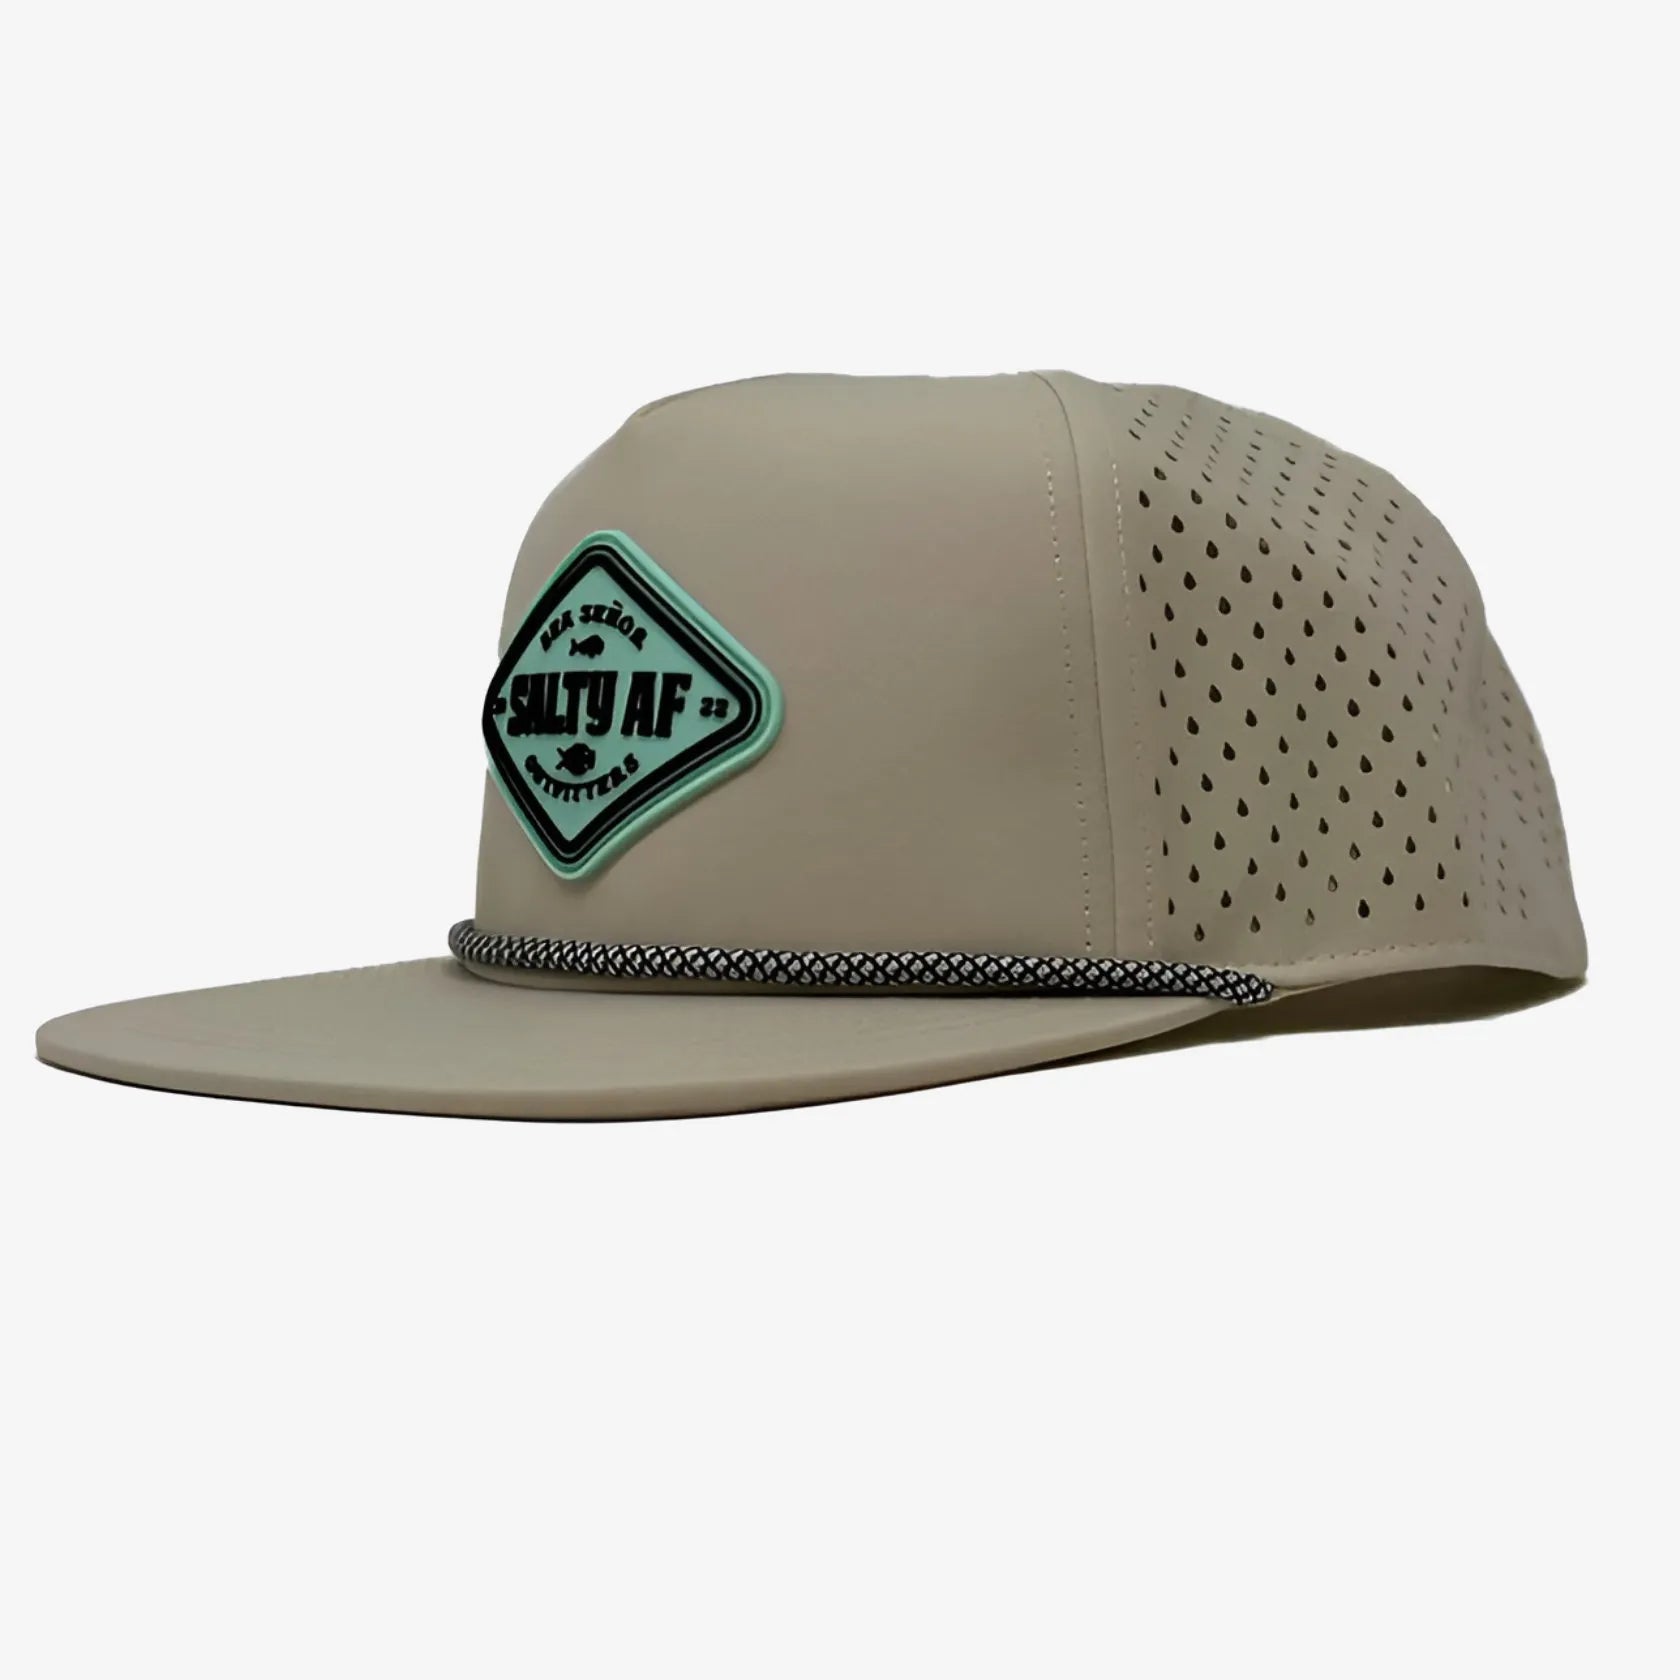 Salty AF - Performance Snapback - Sea Señor Outfitters